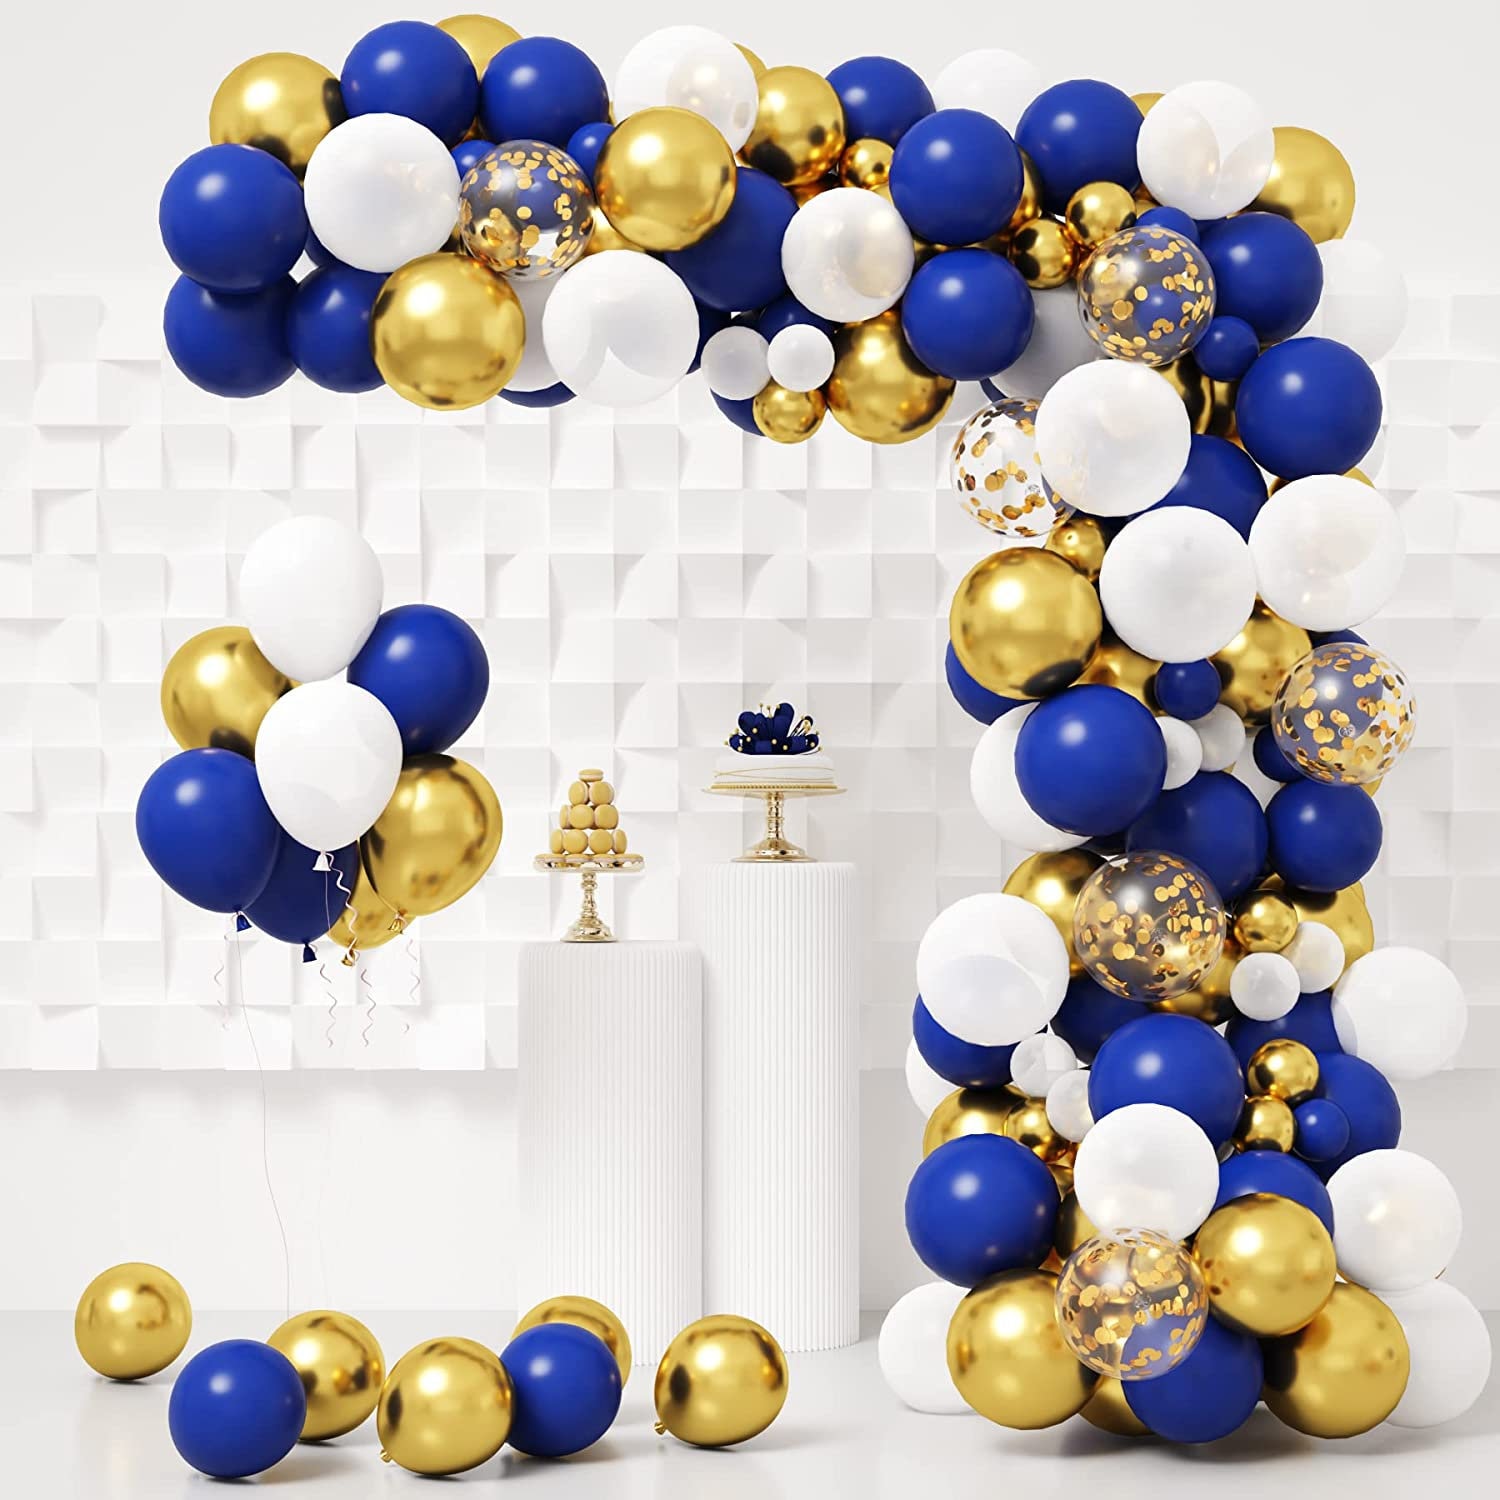 100pcs Red White Blue Balloon Garland Kit for Boys Men Royal Navy Blue Party Decorations Arch Balloons Set with 16ft Balloon Stripe Tape Chain for